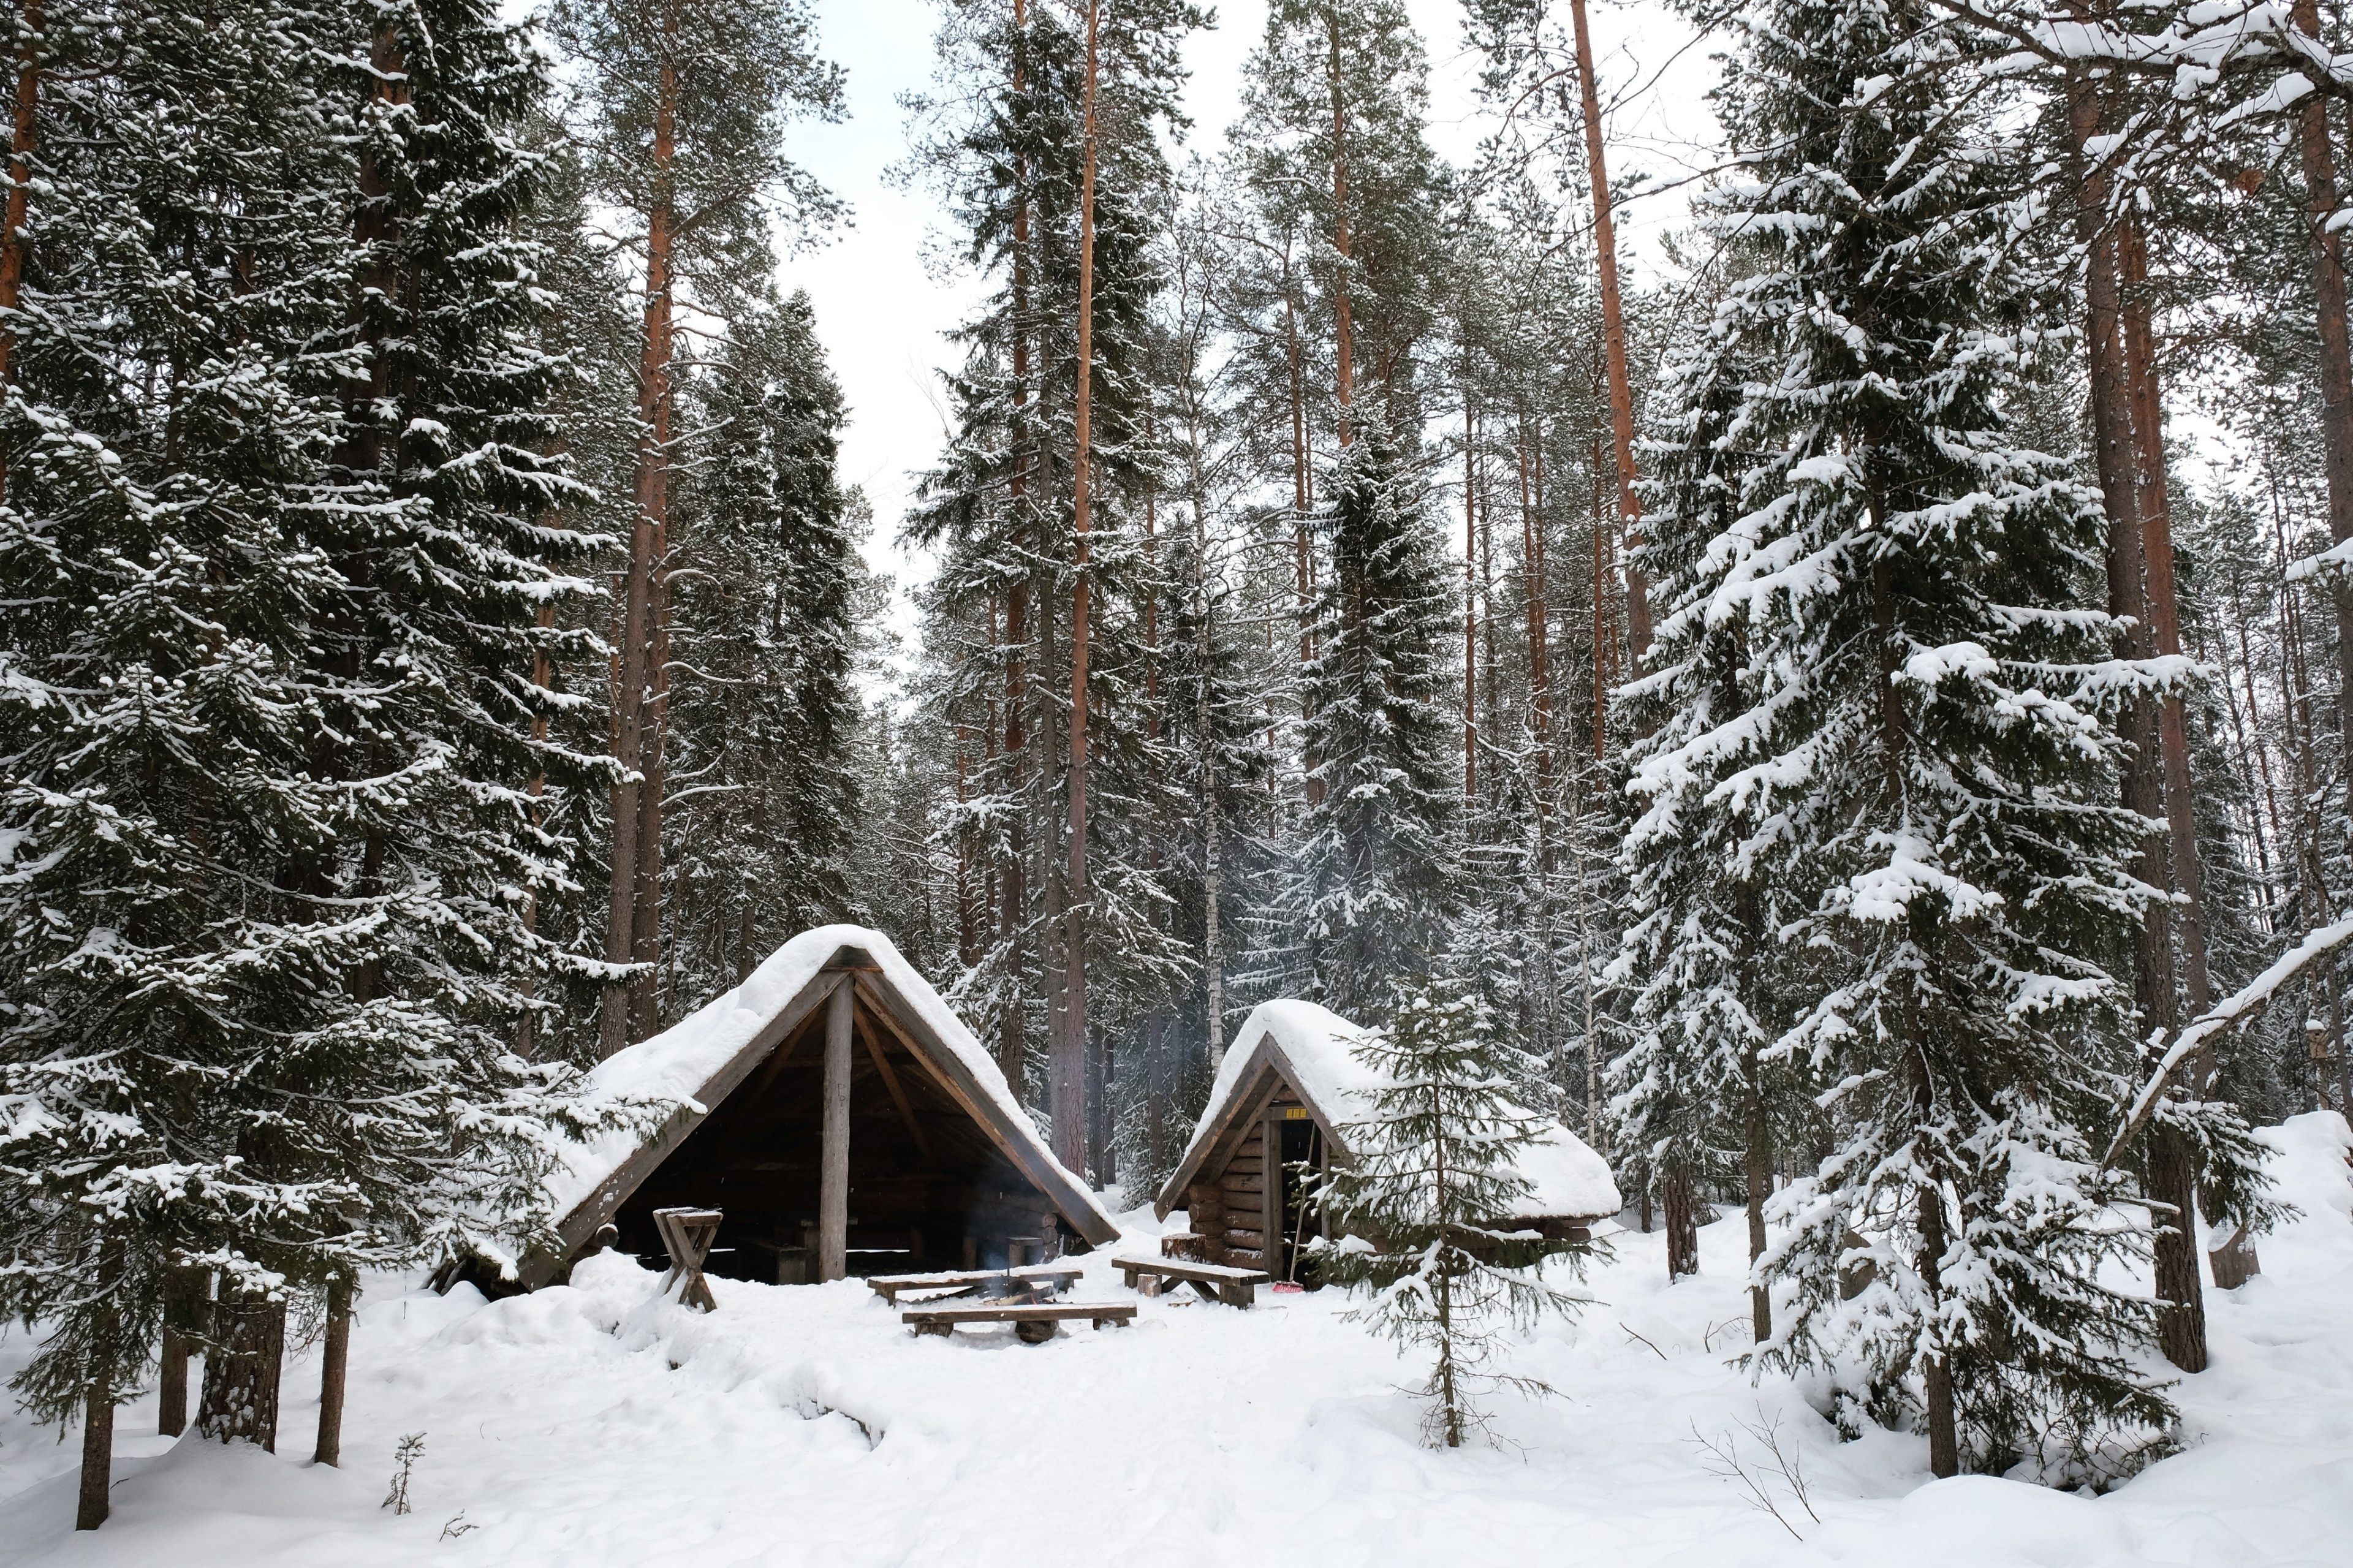 Wallpaper / looking at small cabins inside a forest in rovaniemi during the cold winter months in finland, cabin in winter wonderland 4k wallpaper free download